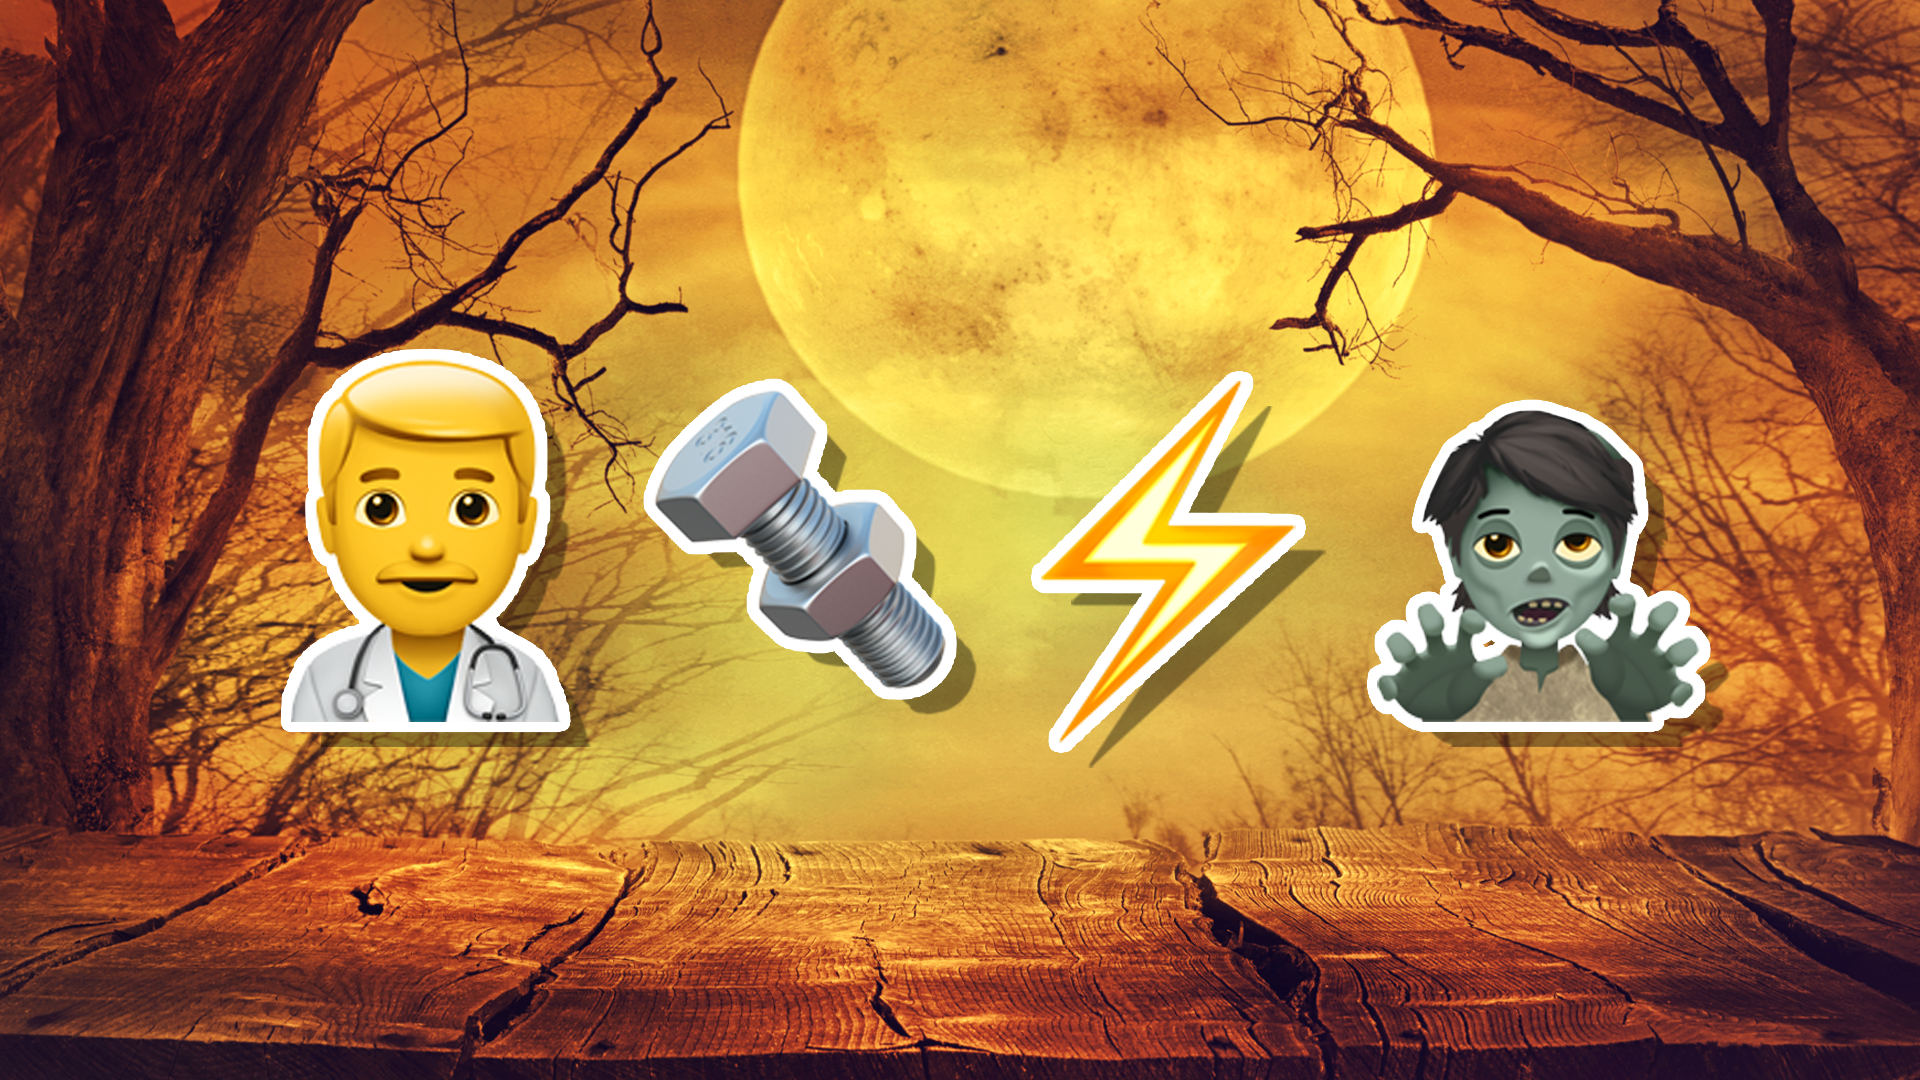 Halloween emoji with a doctor, a bolt, lightning and a zombie